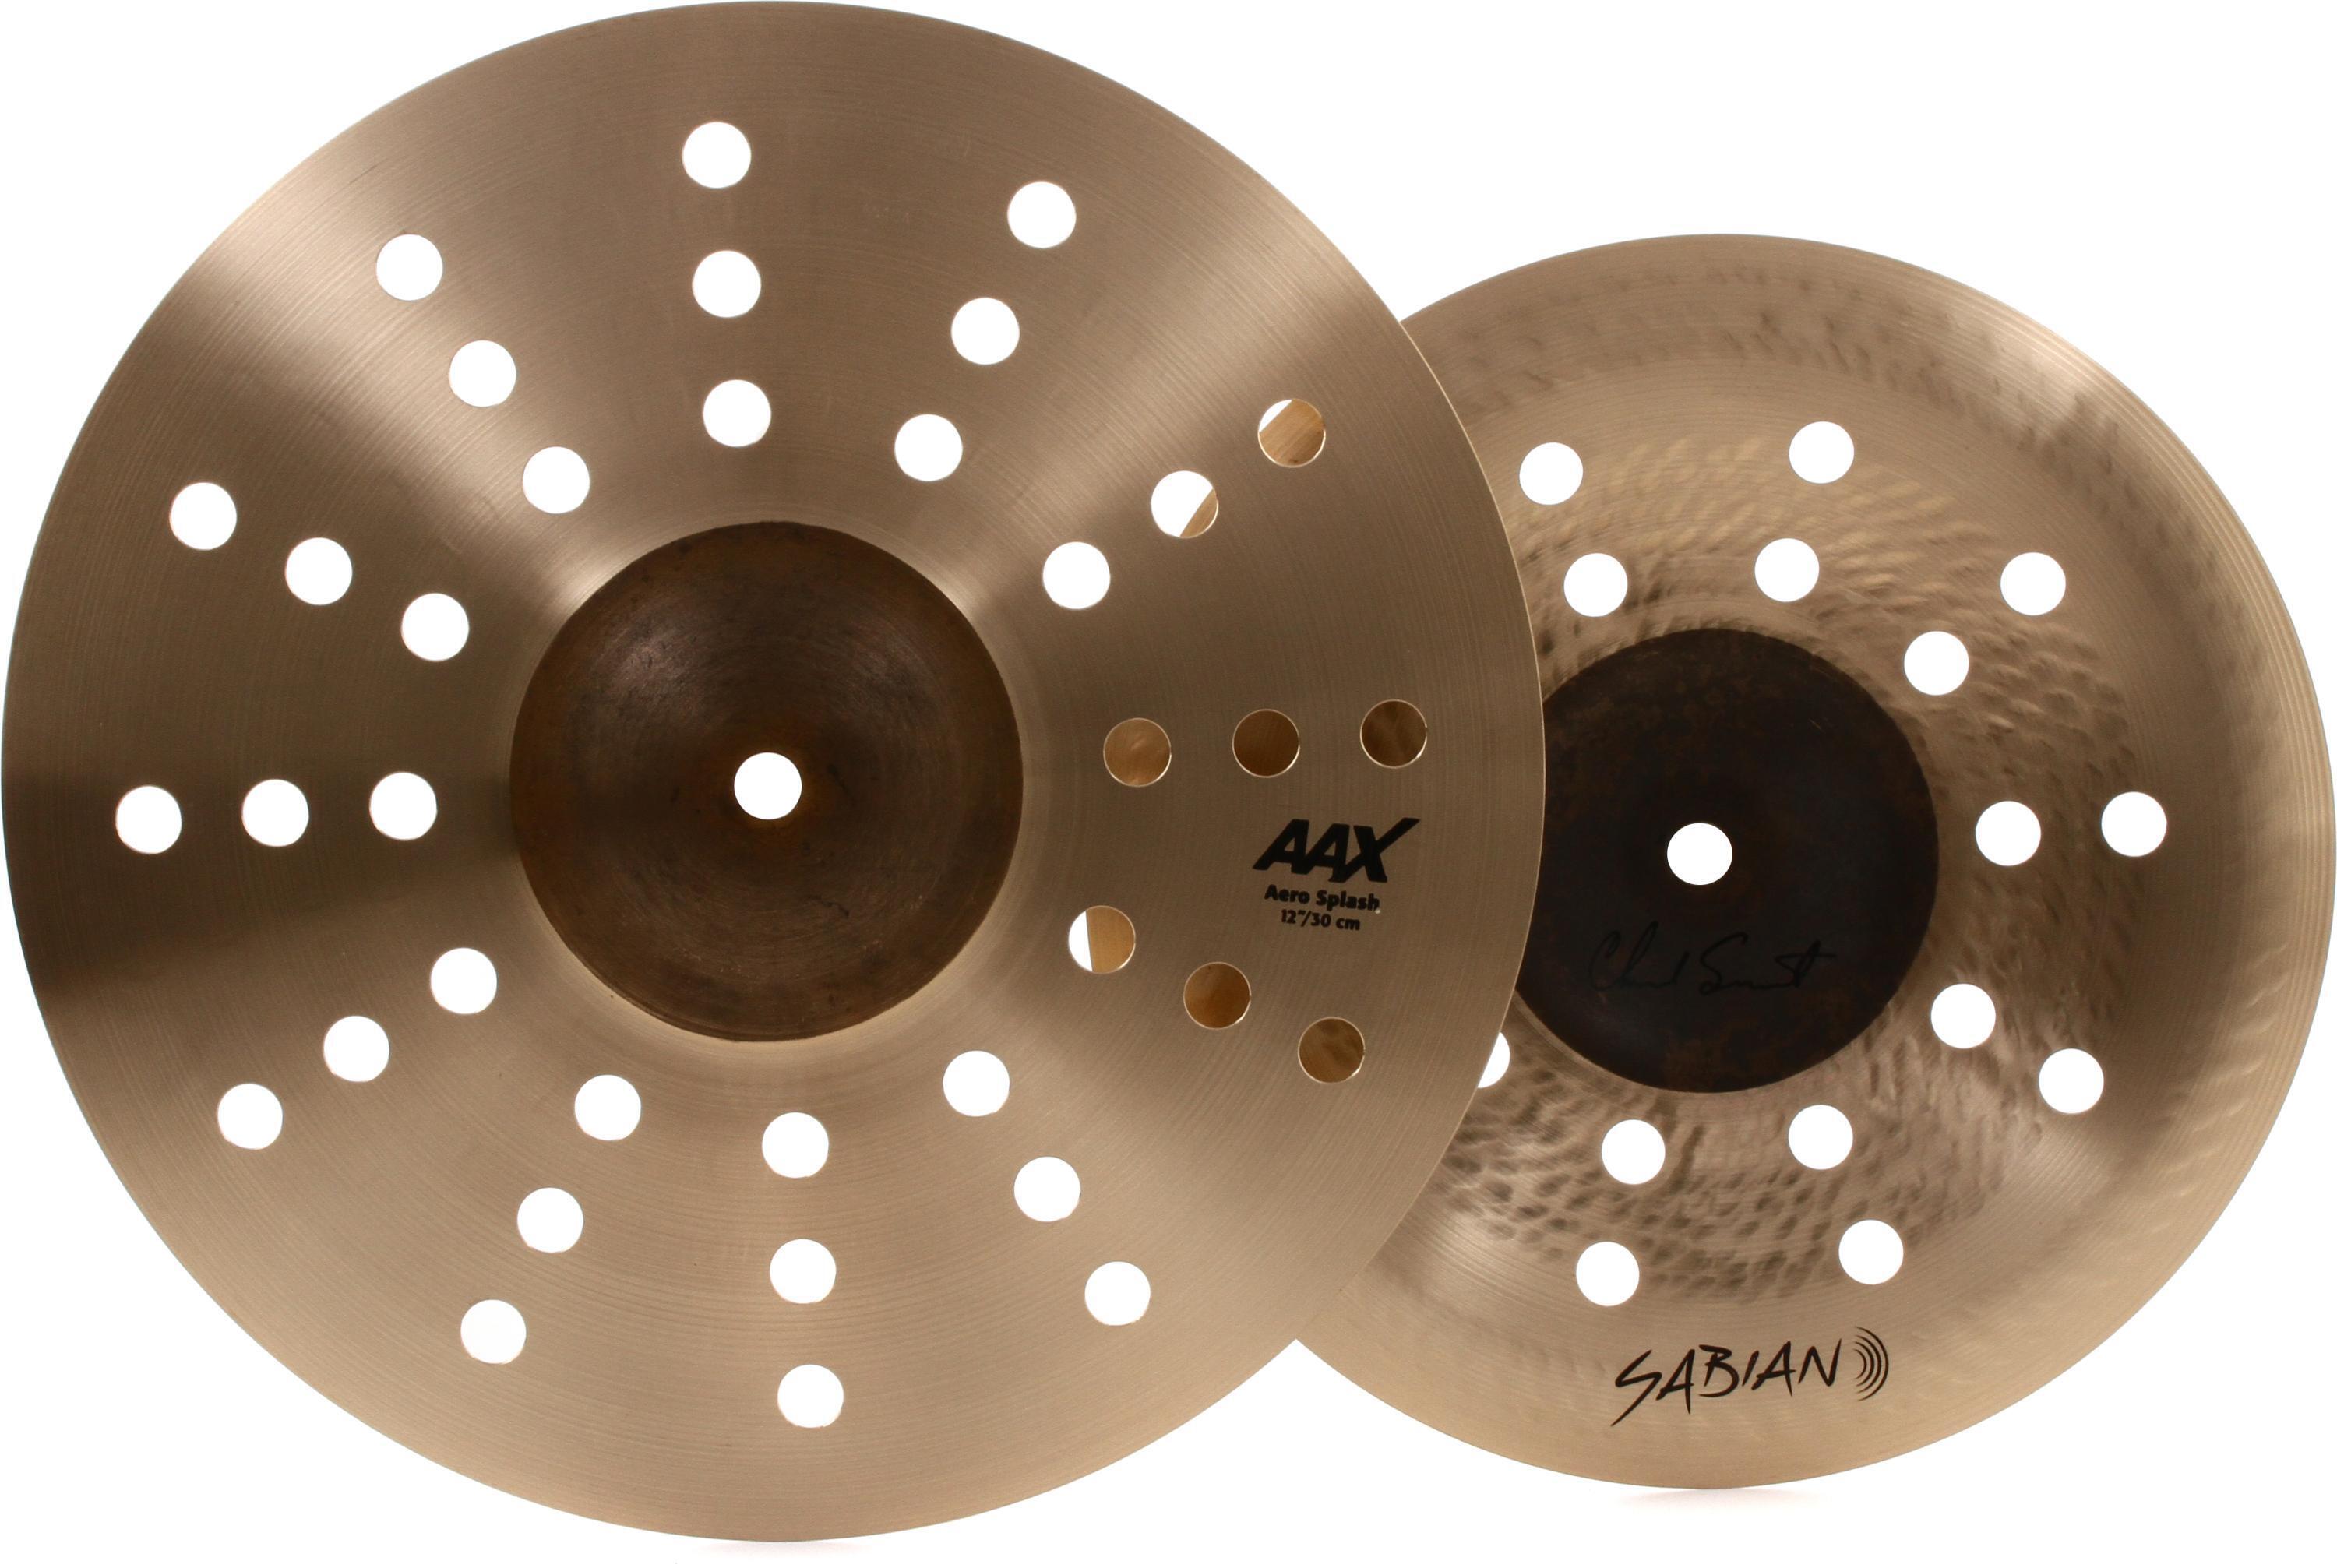 Sabian AAX Suspended Cymbal - 18-inch | Sweetwater